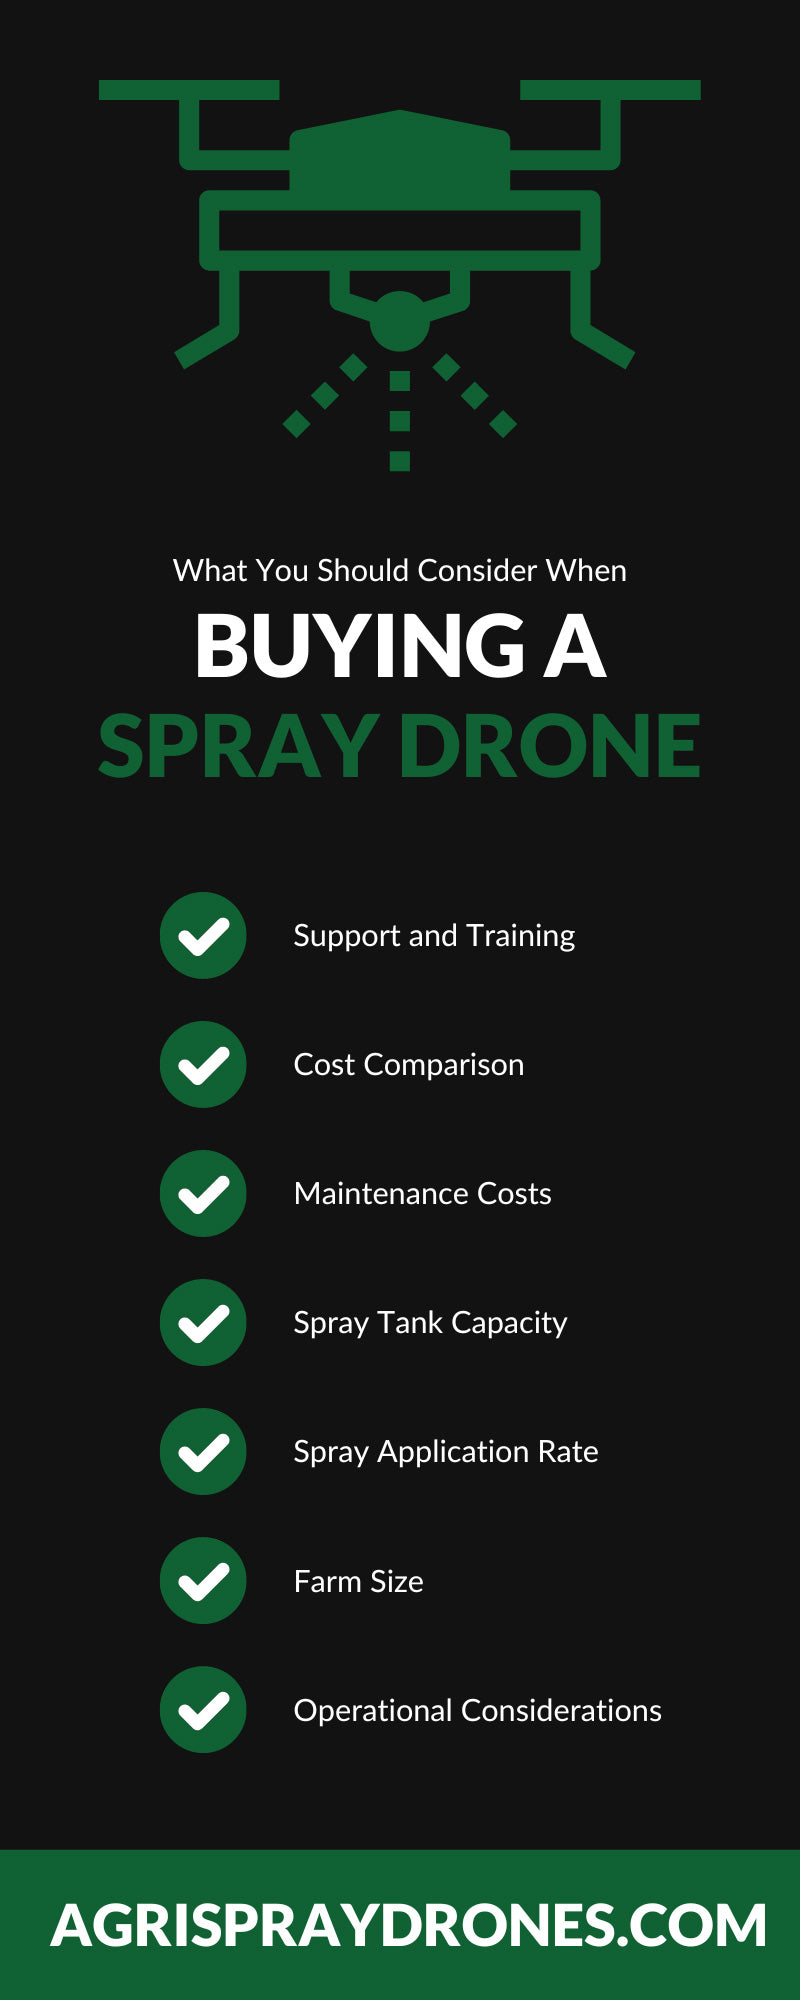 What You Should Consider When Buying a Spray Drone